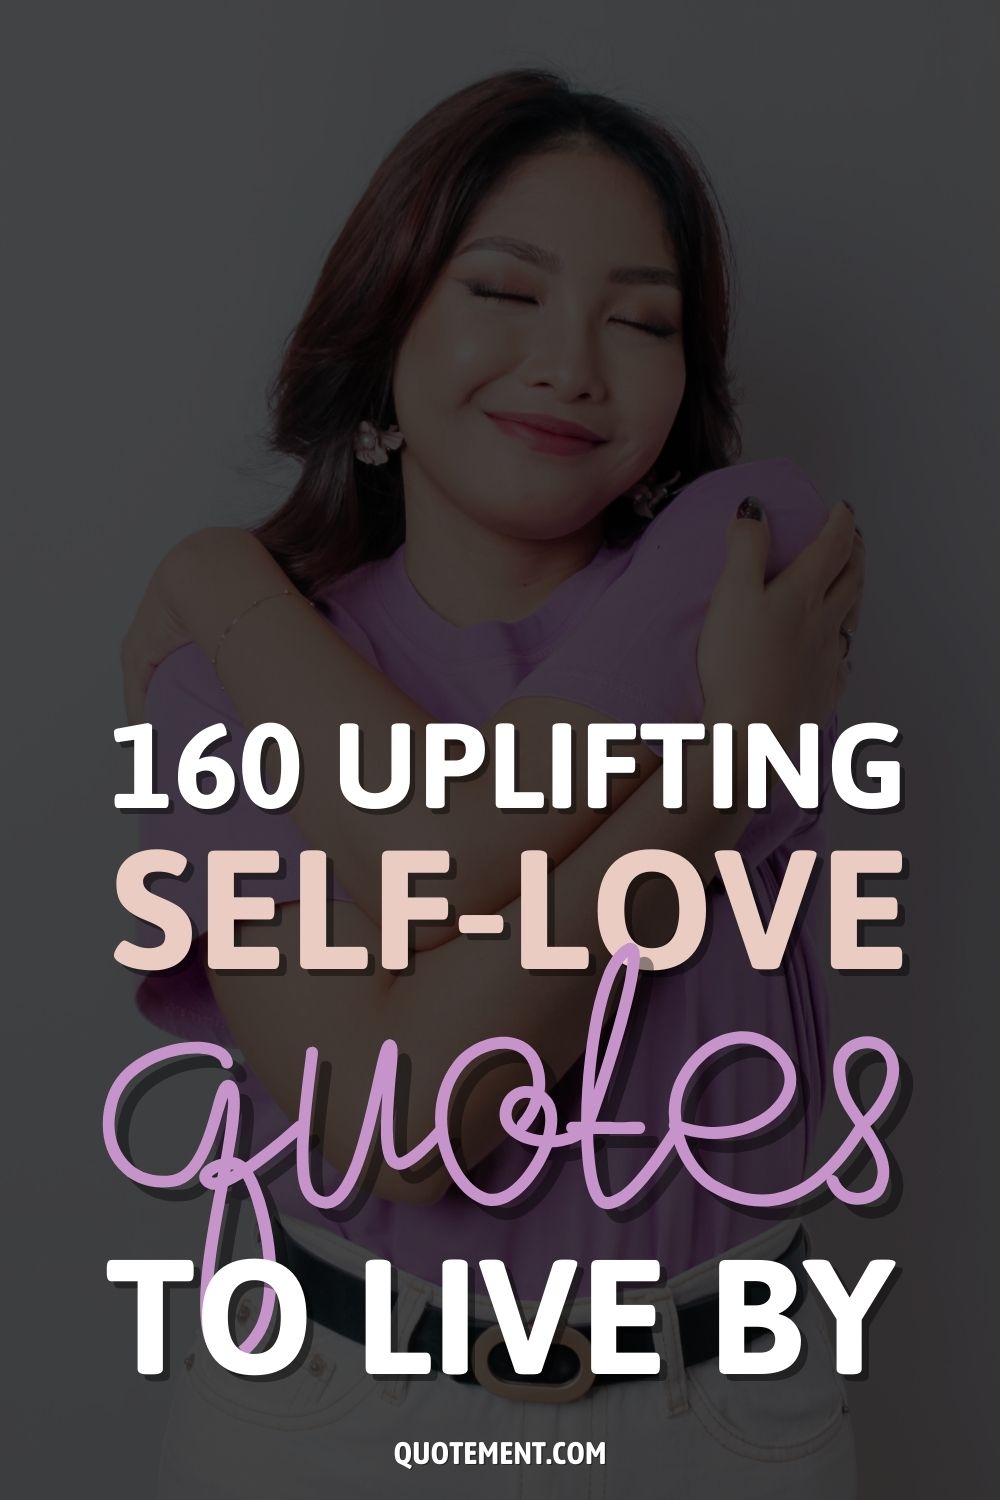 160 Self-Love Quotes For A Fearless And Unapologetic You
